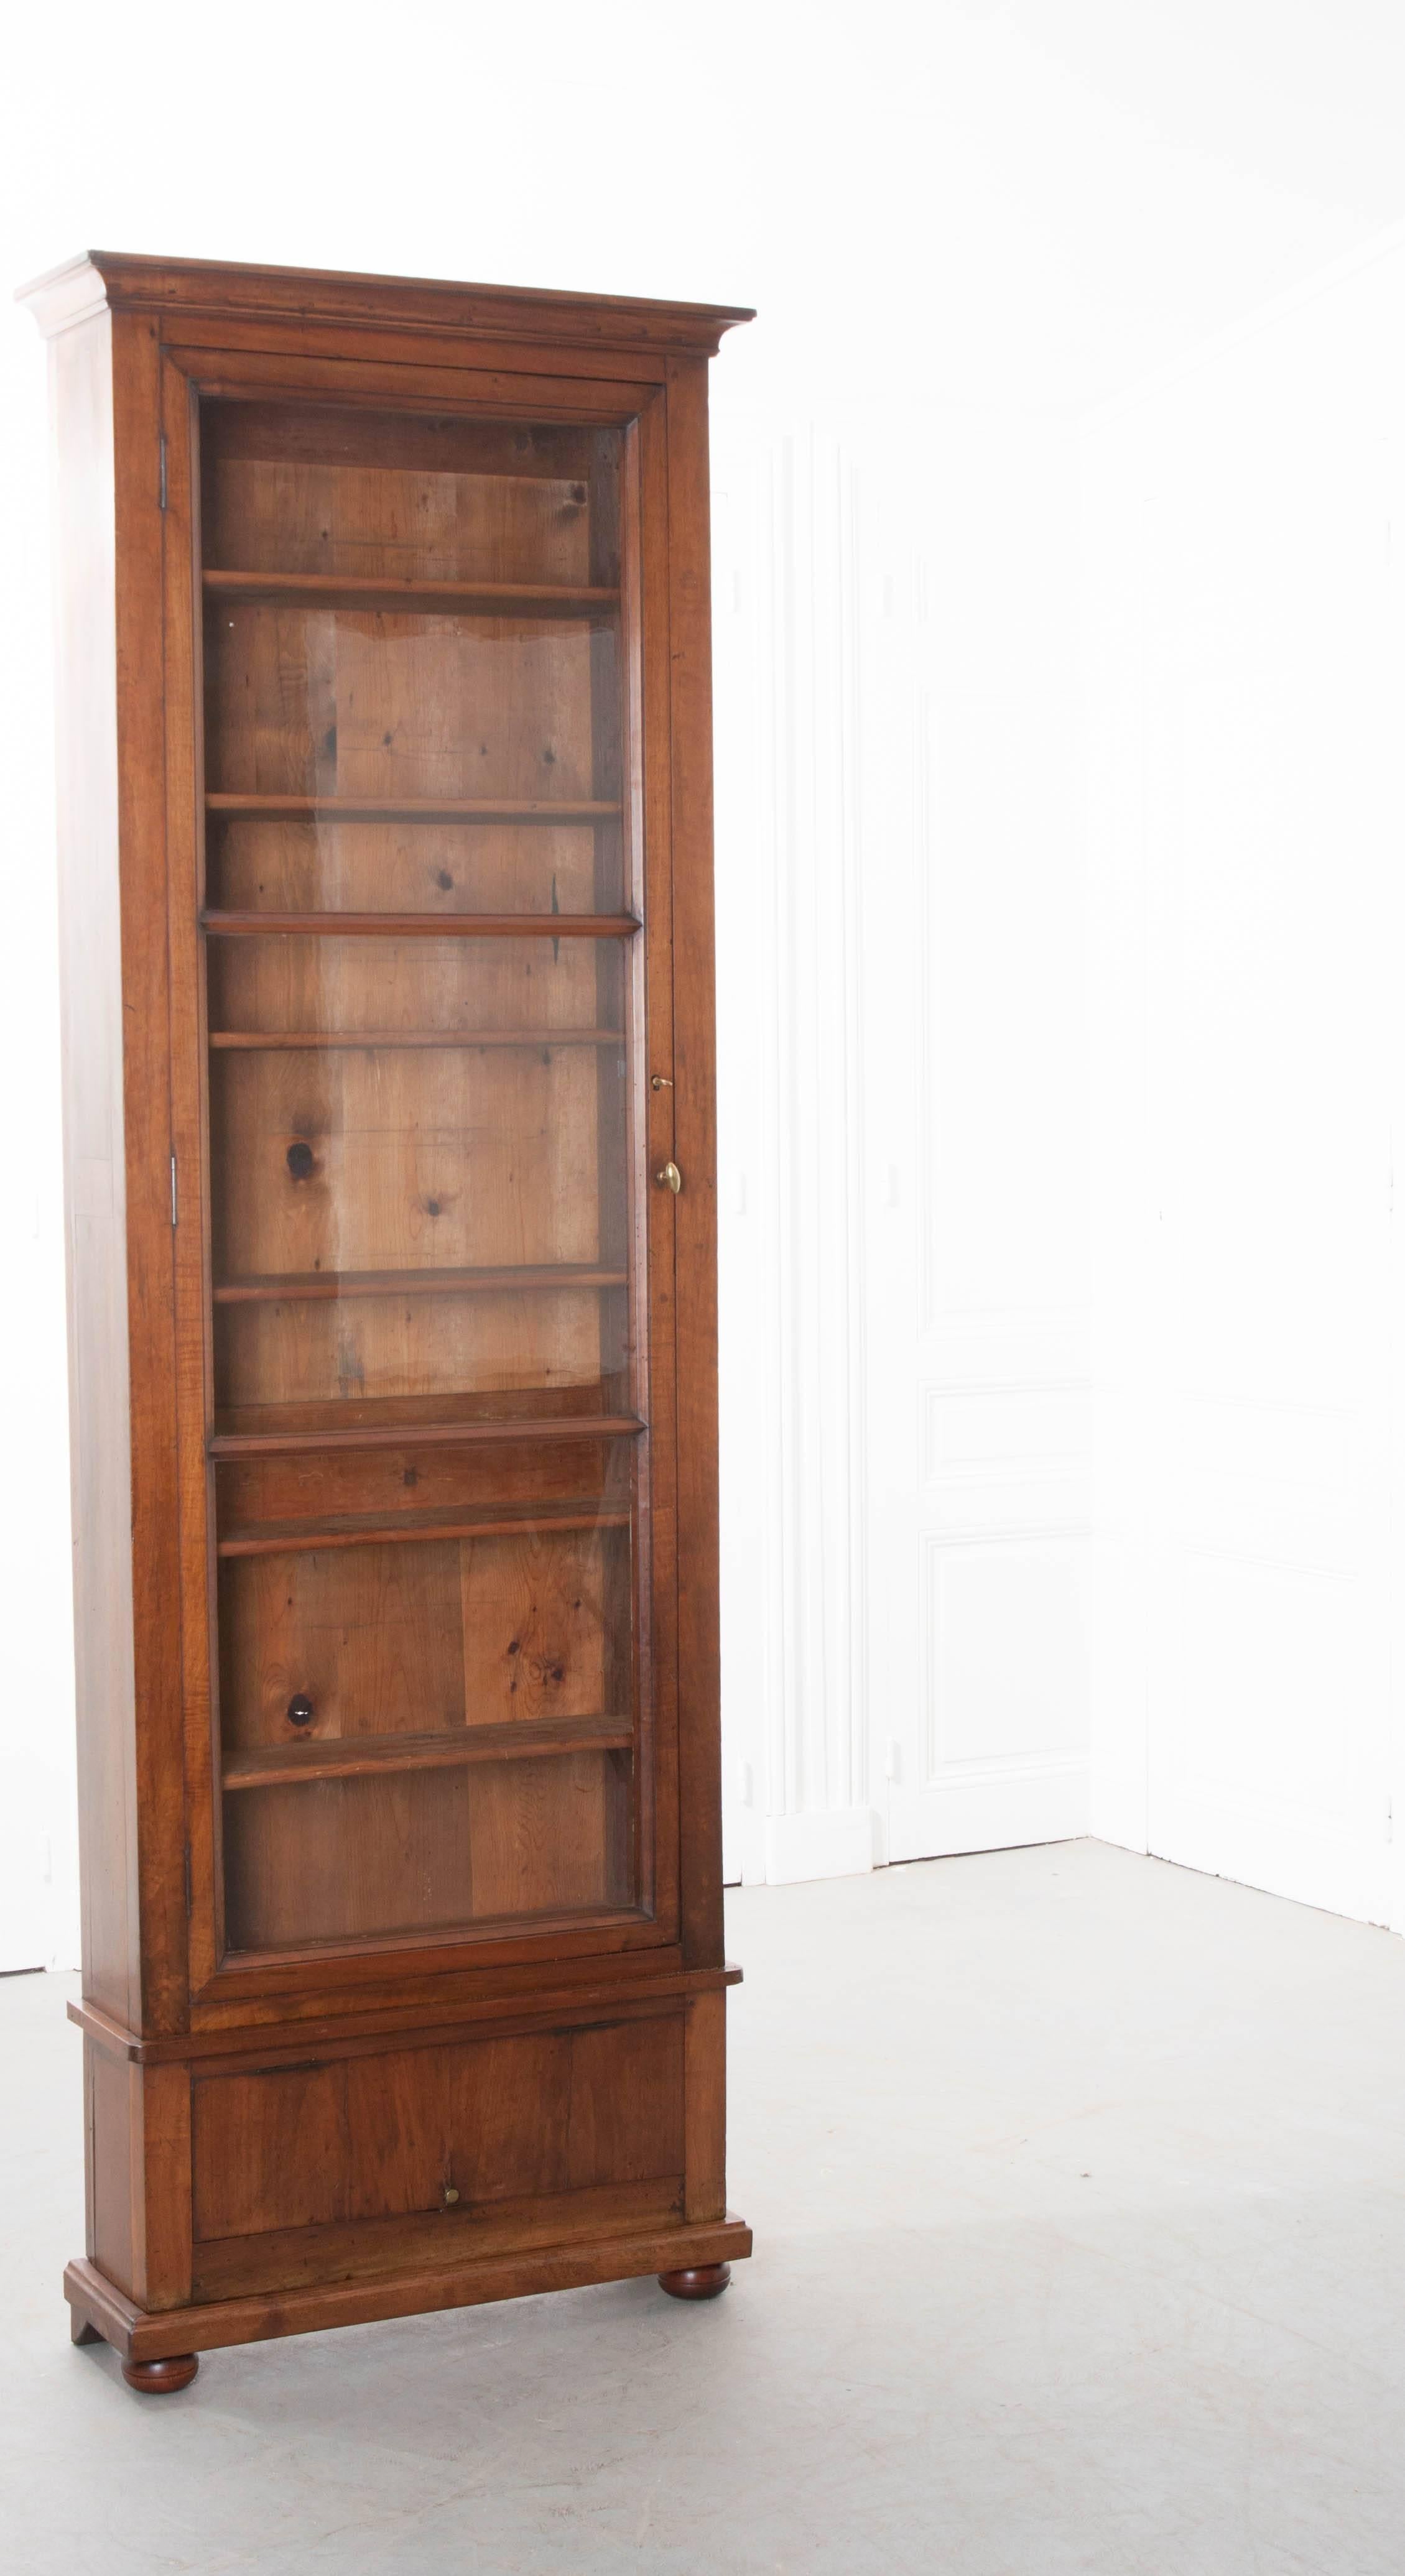 This remarkable walnut bibliothèque is a 19th century French creation. The single door bibliothèque has its original wavy glass from top to bottom. The door has a working lock and brass knob that will secure it with a simple twist. The interior has